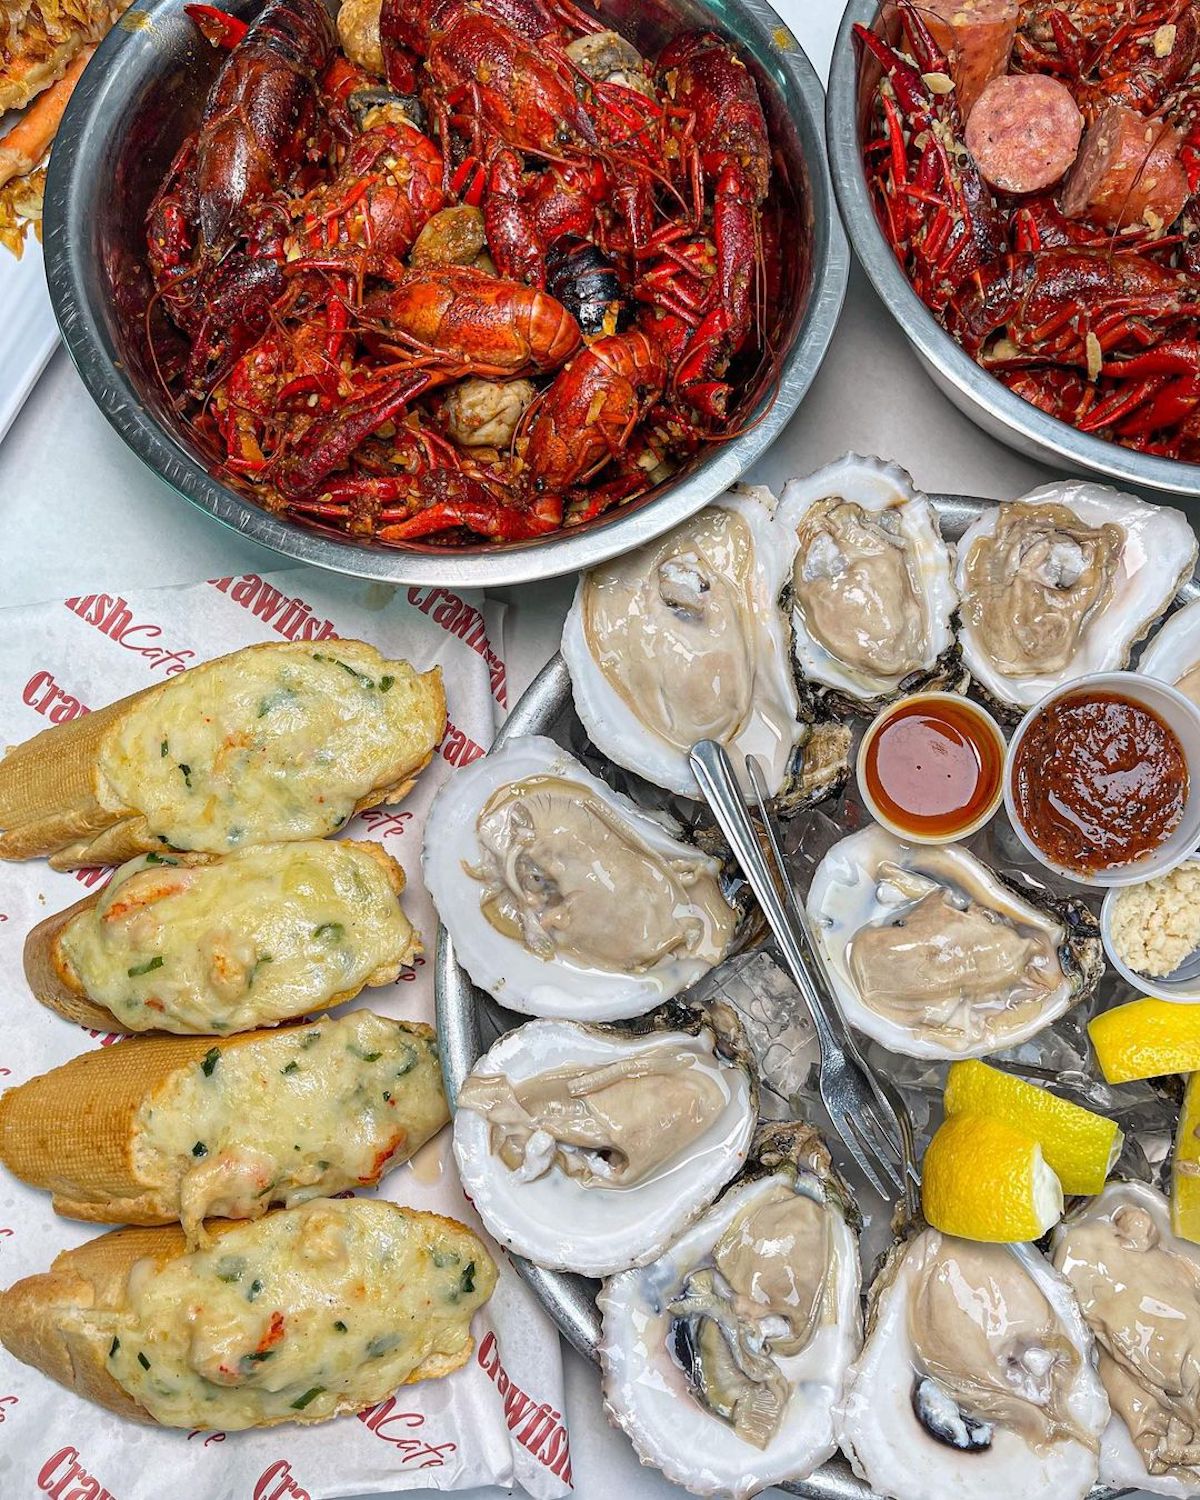 The popular Viet-Cajun crawfish eatery will expand to Mesa and Glendale.